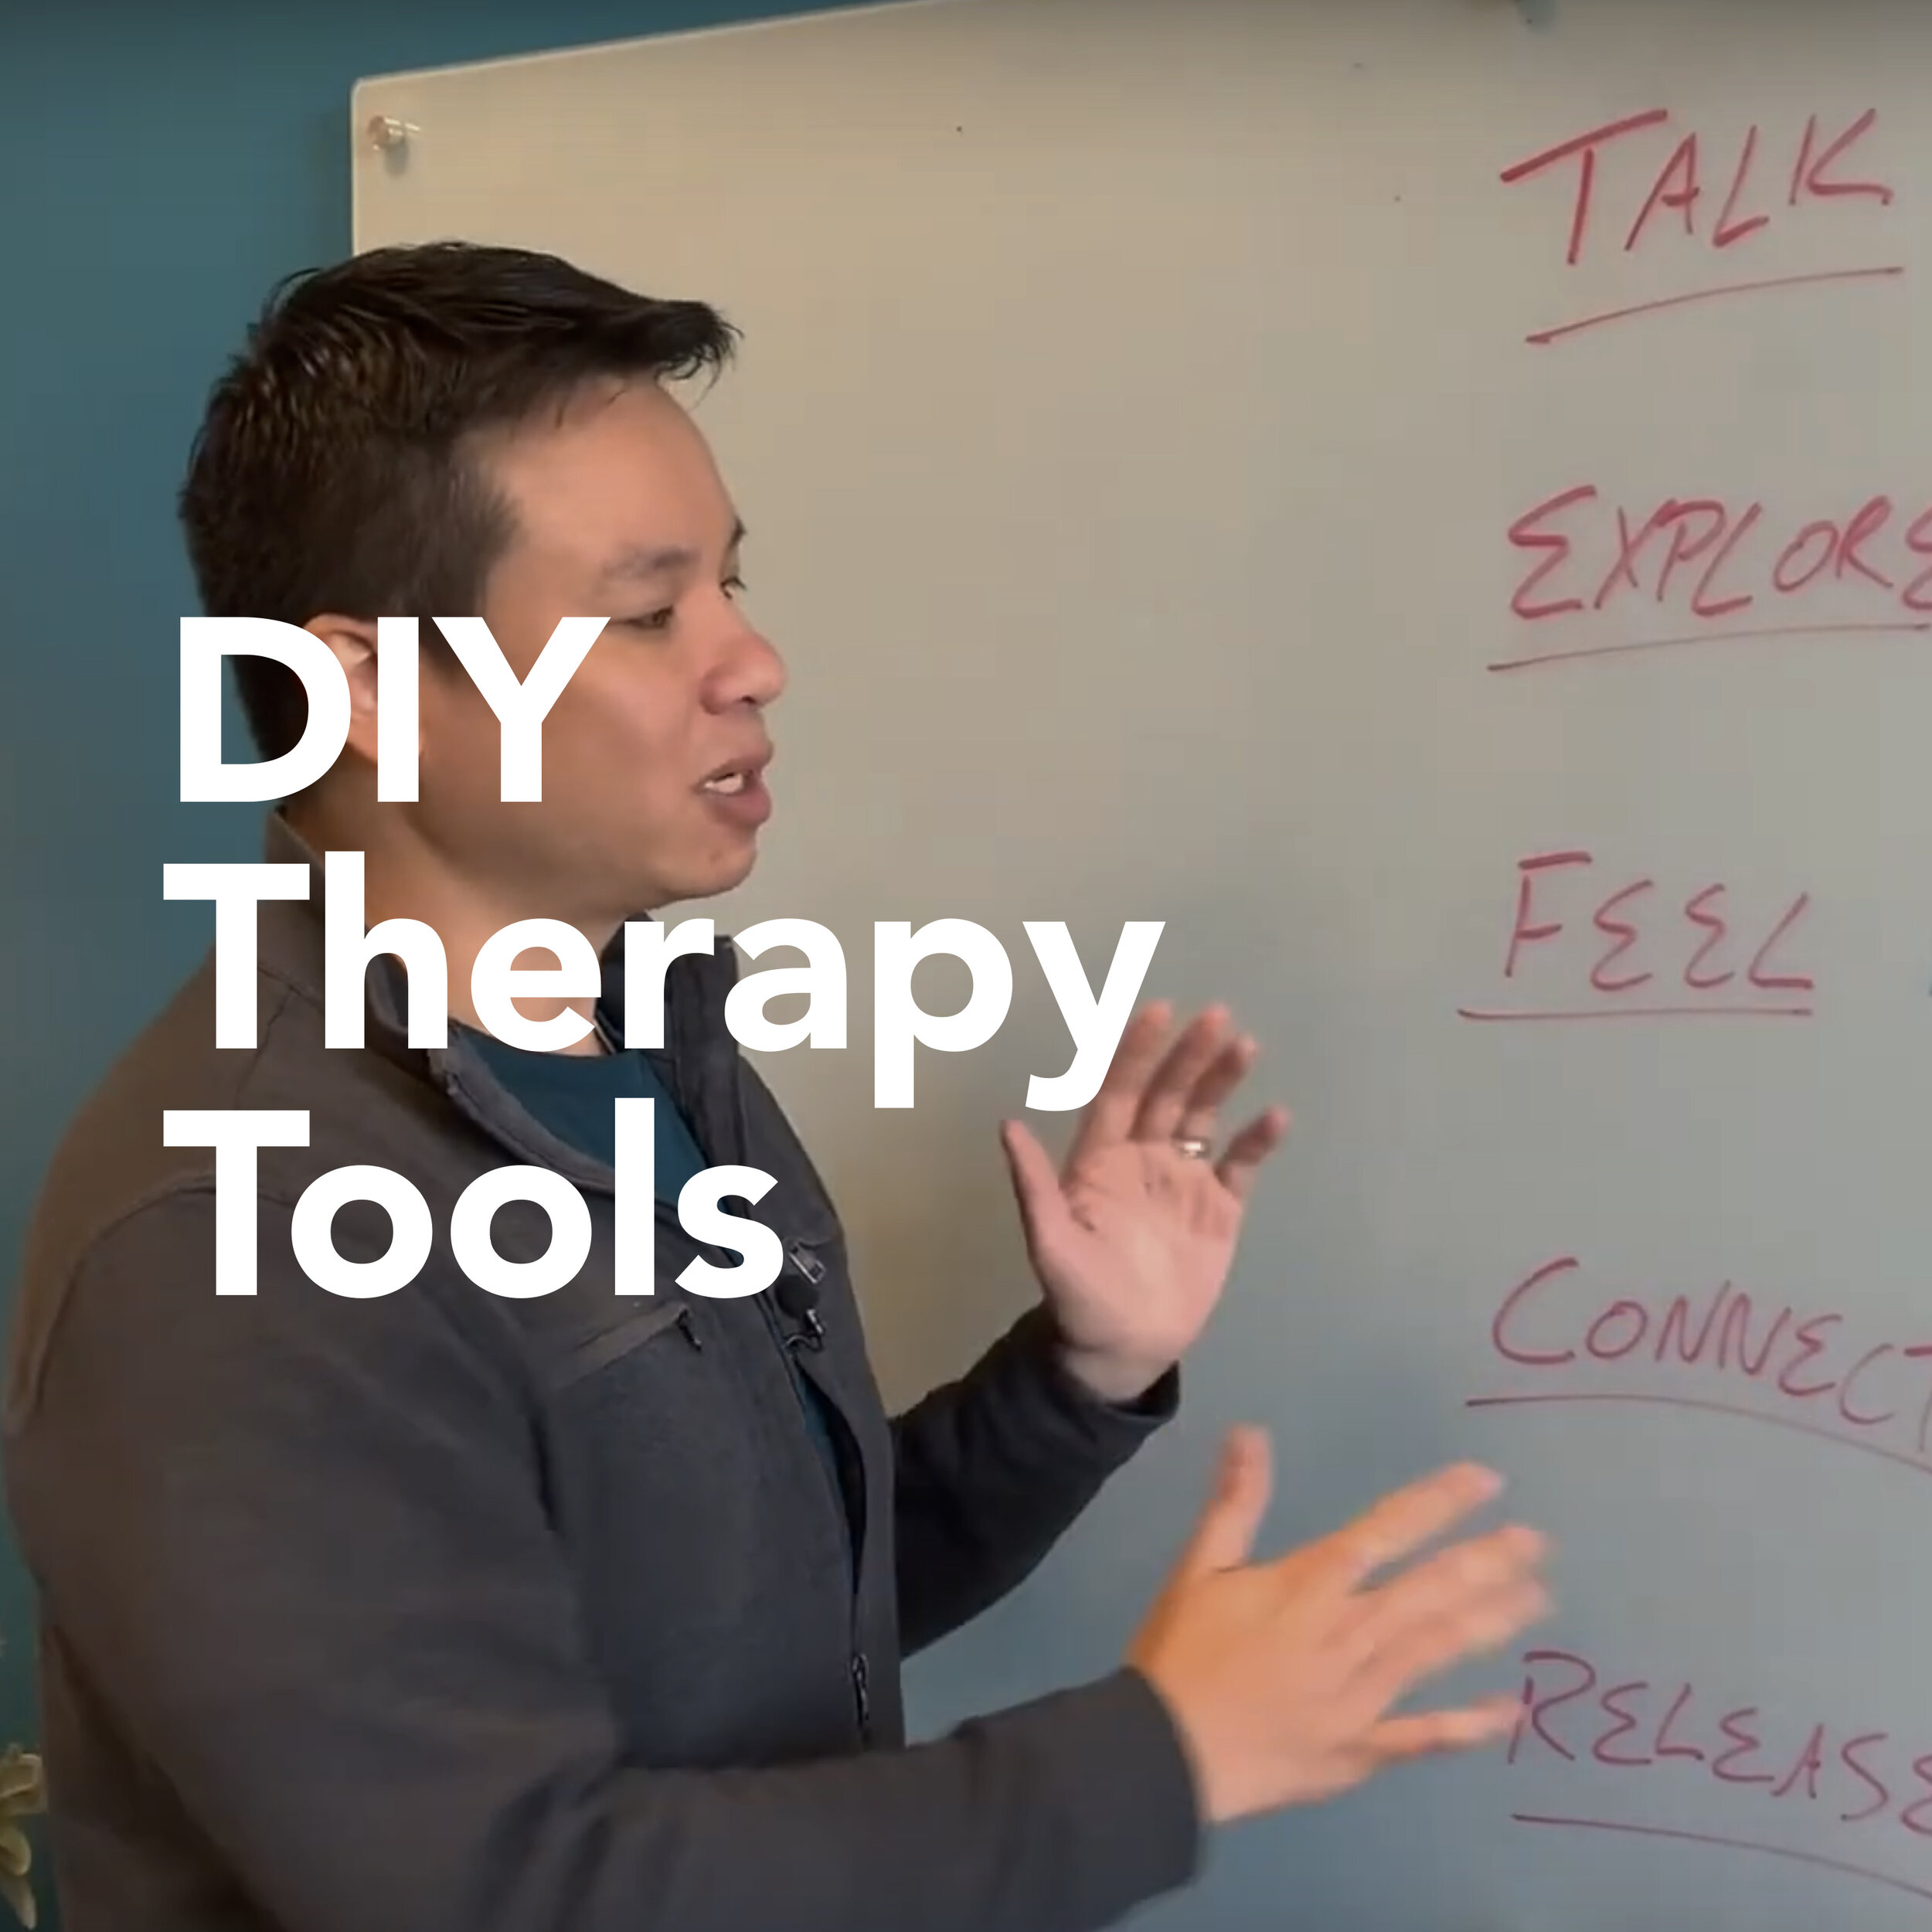 DIY Therapy Tools